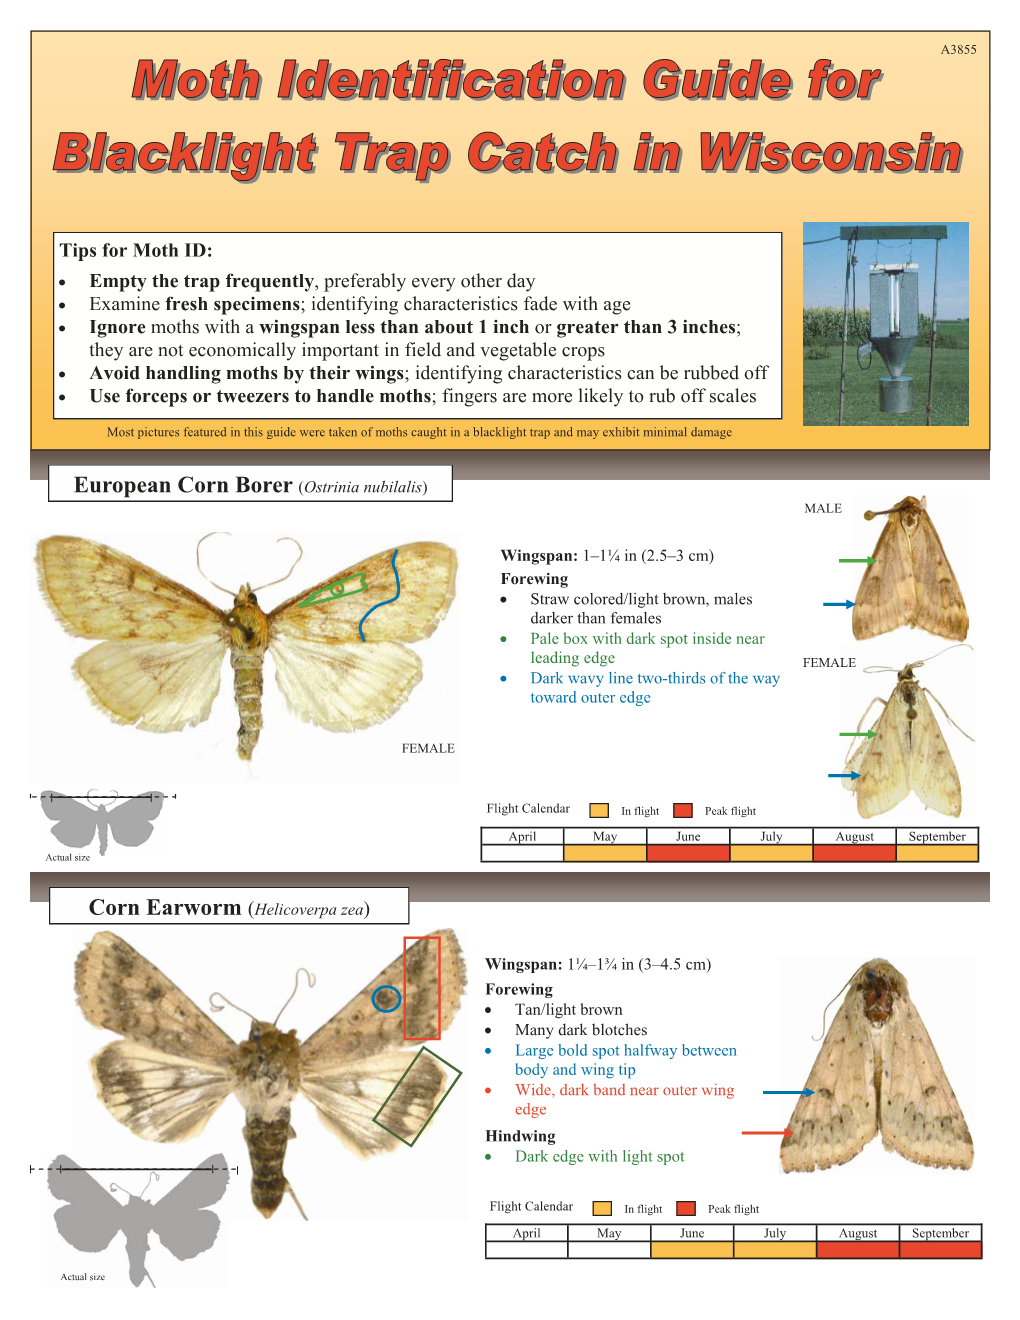 Moth Identification Guide for Blacklight Trap Catch in Wisconsin (A3855)